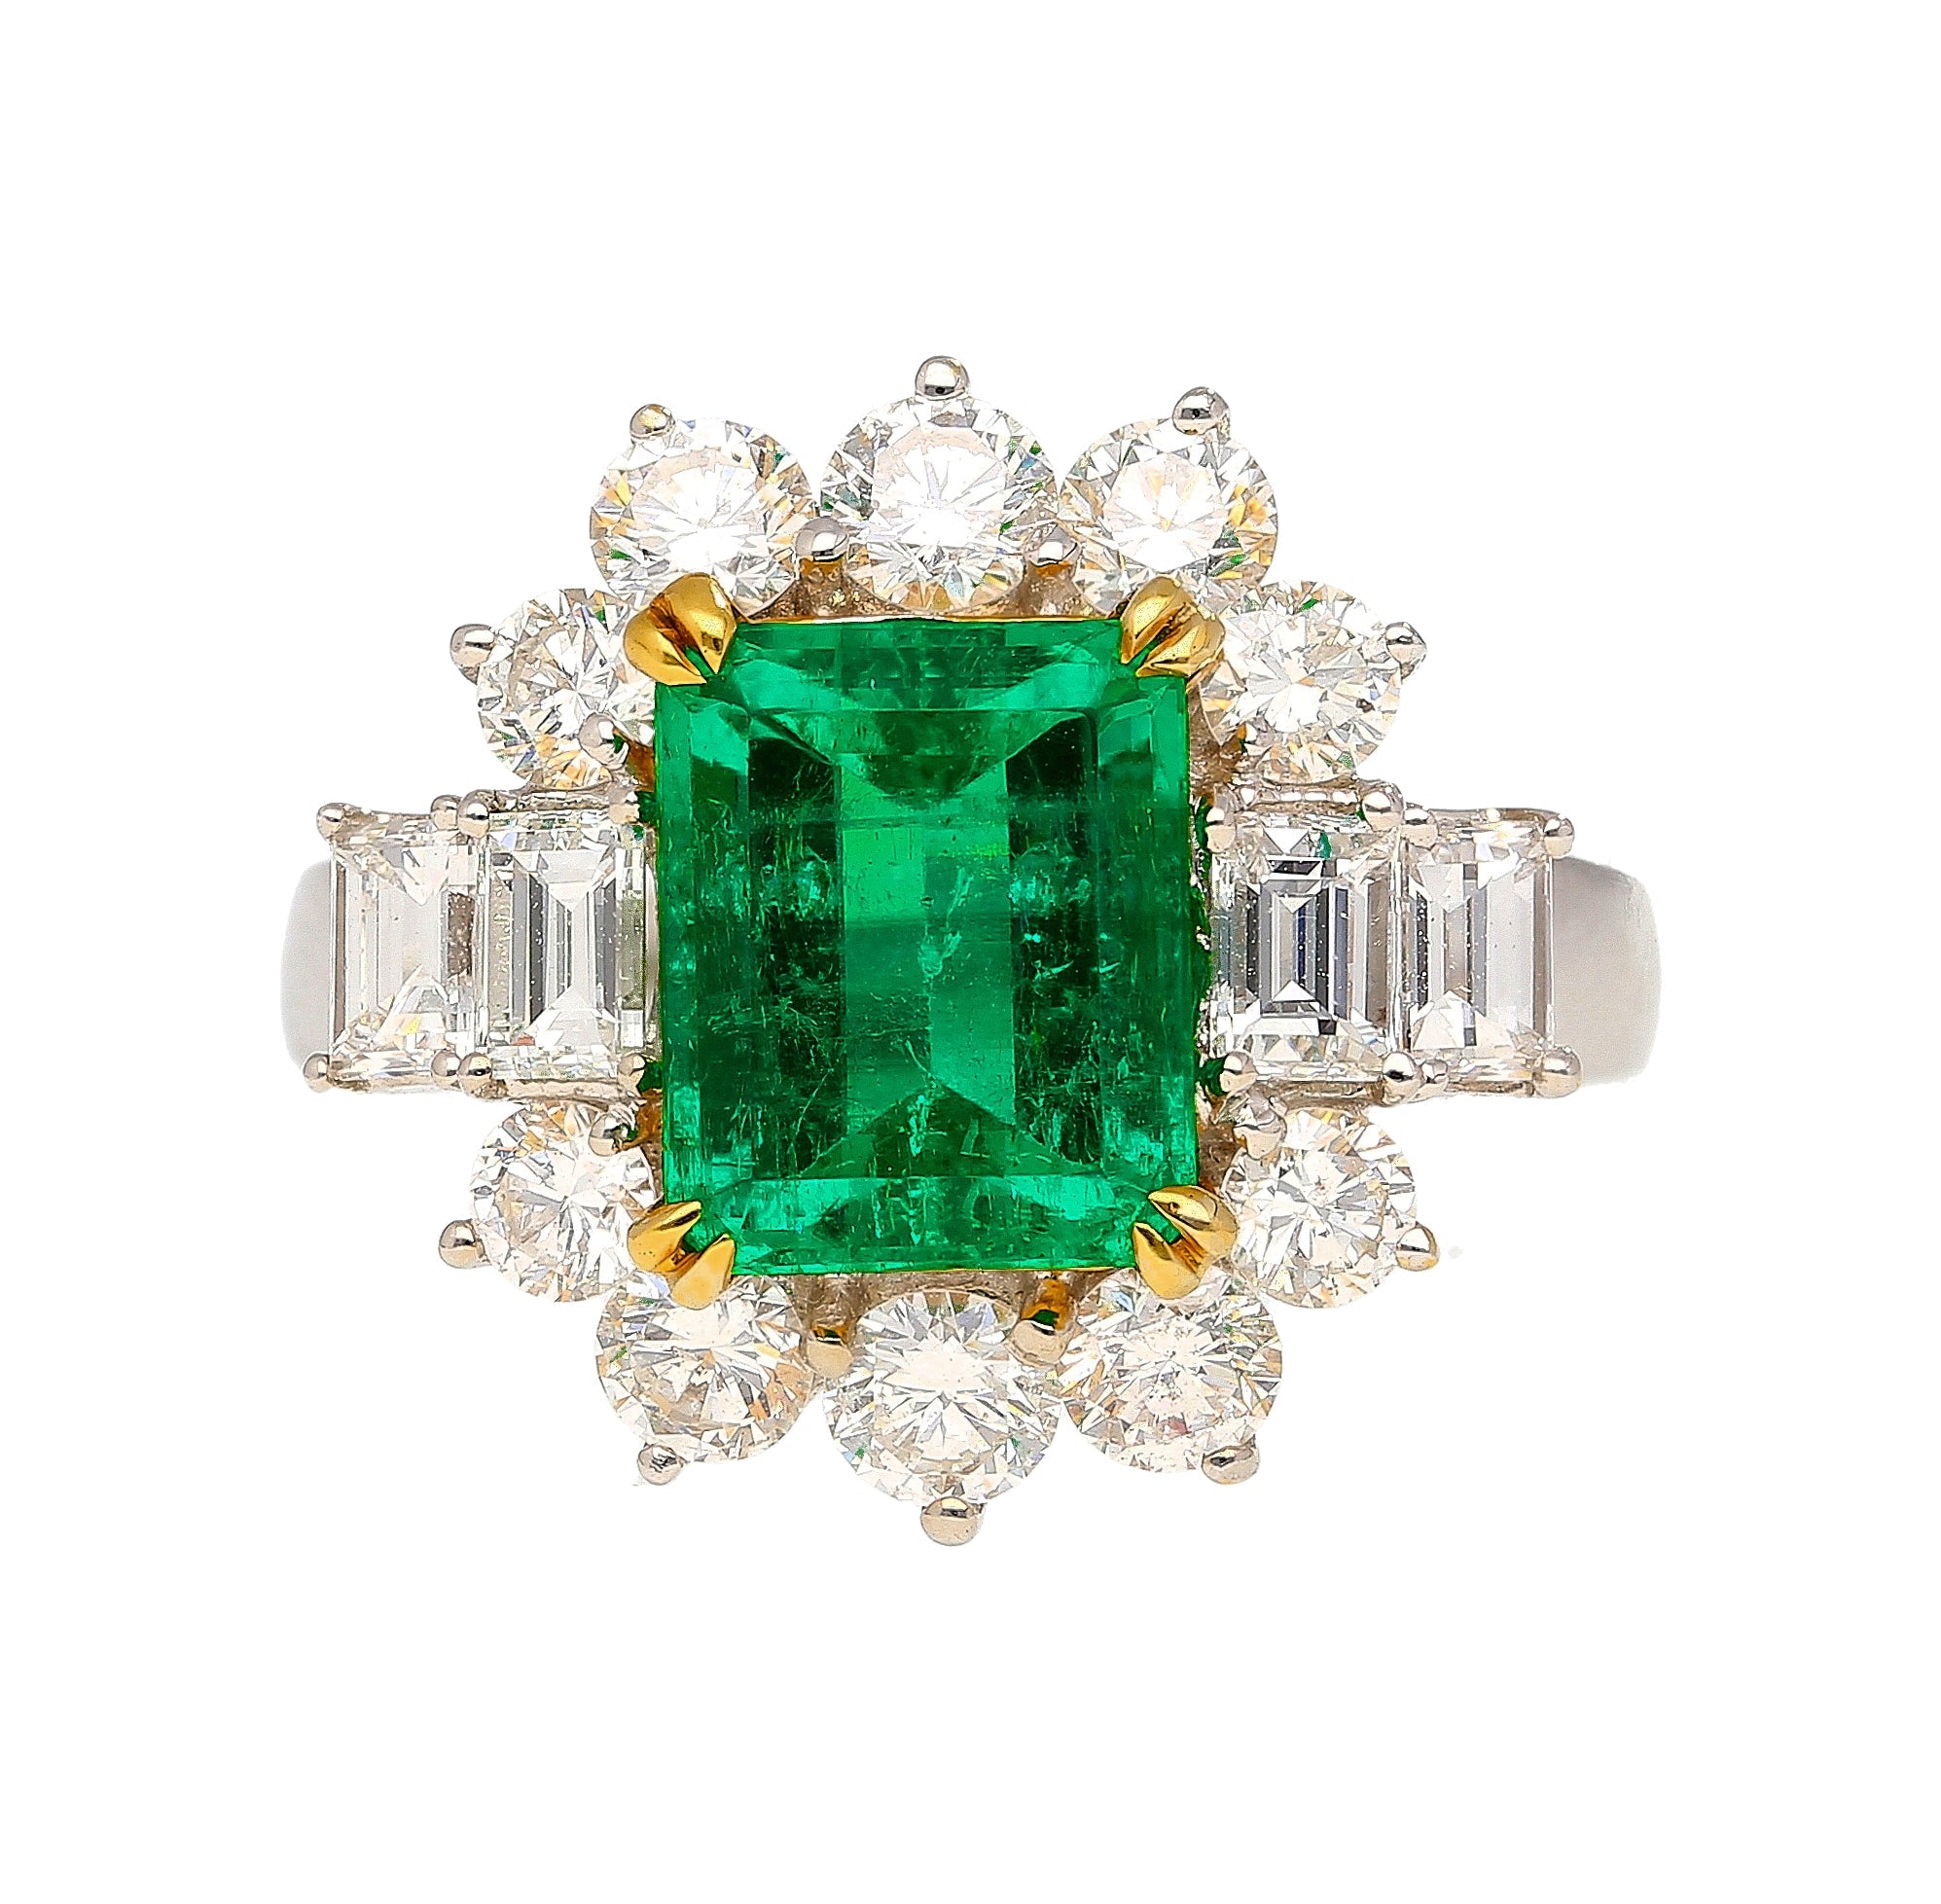 4_42-Carat-TW-Colombian-Emerald-with-Round-Emerald-Cut-Diamonds-Sides-in-18K-White-Gold-Rings.jpg